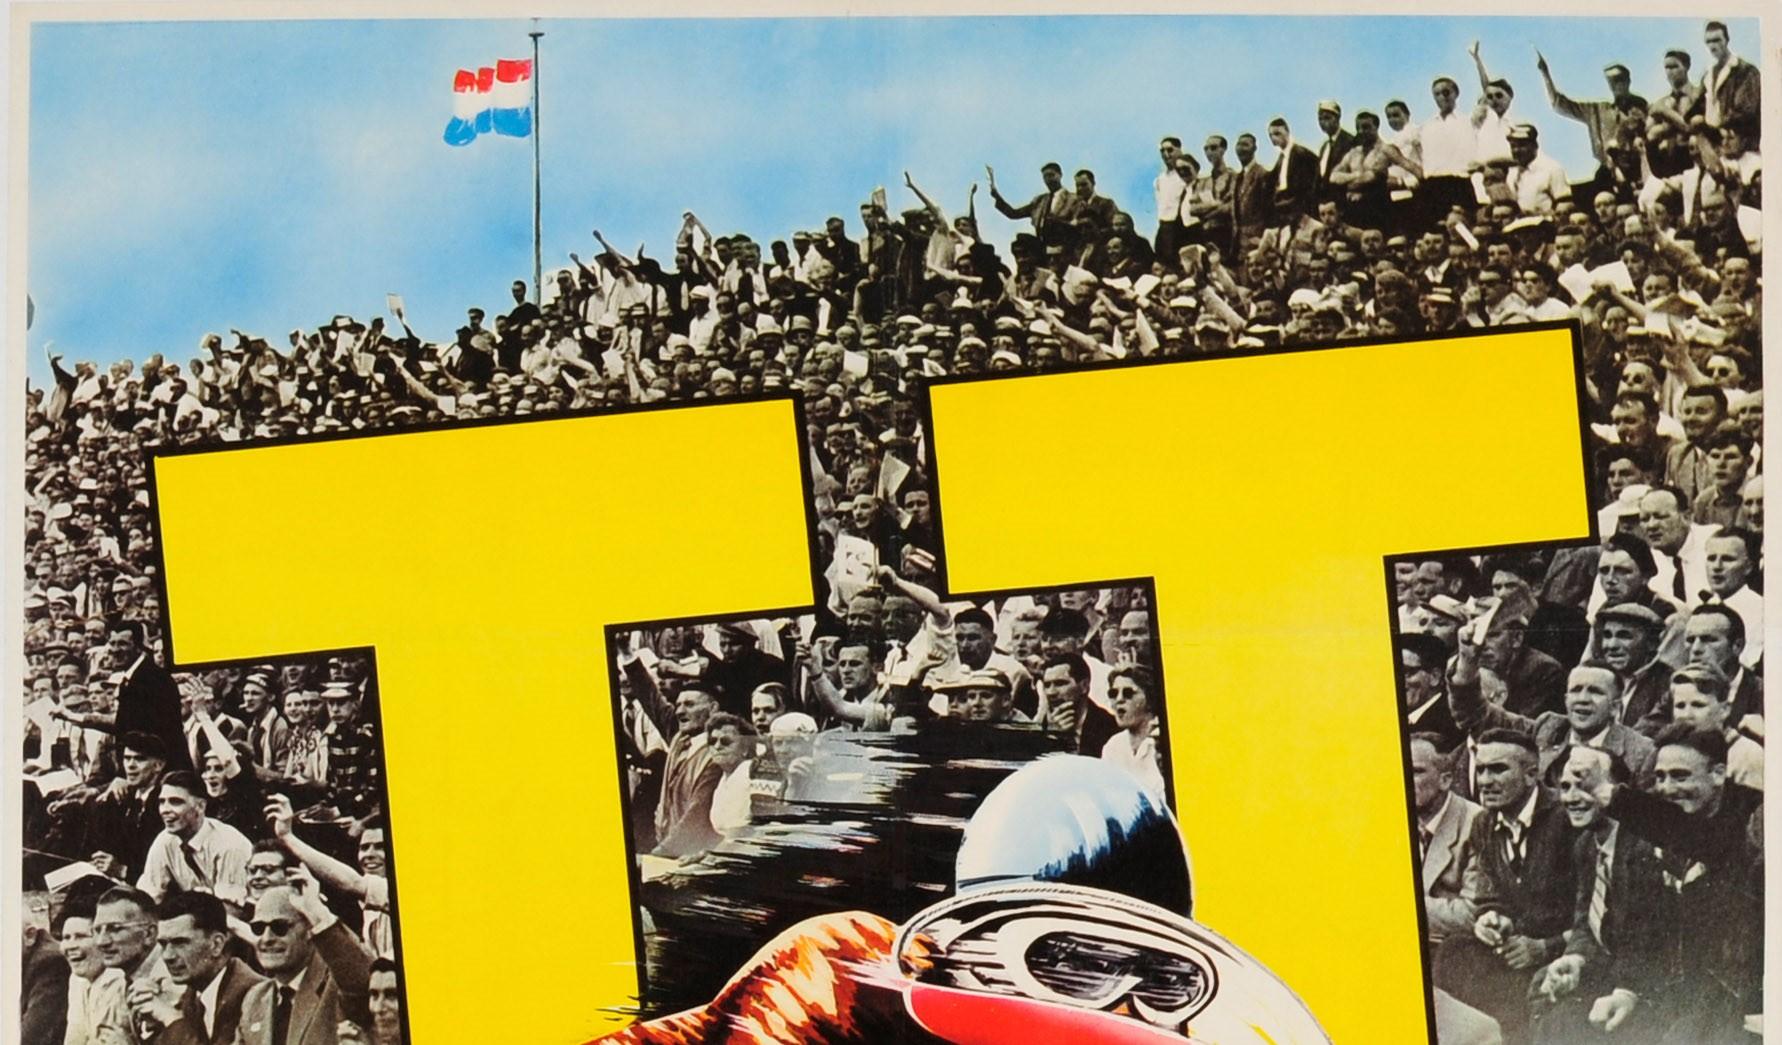 Original vintage sport poster advertising the Dutch TT motor race held in Assen on 26 June 1965. Dynamic artwork featuring a colorful image of a motorbike rider on a motorcycle marked number 7 speeding in front of large TT letters in yellow with a